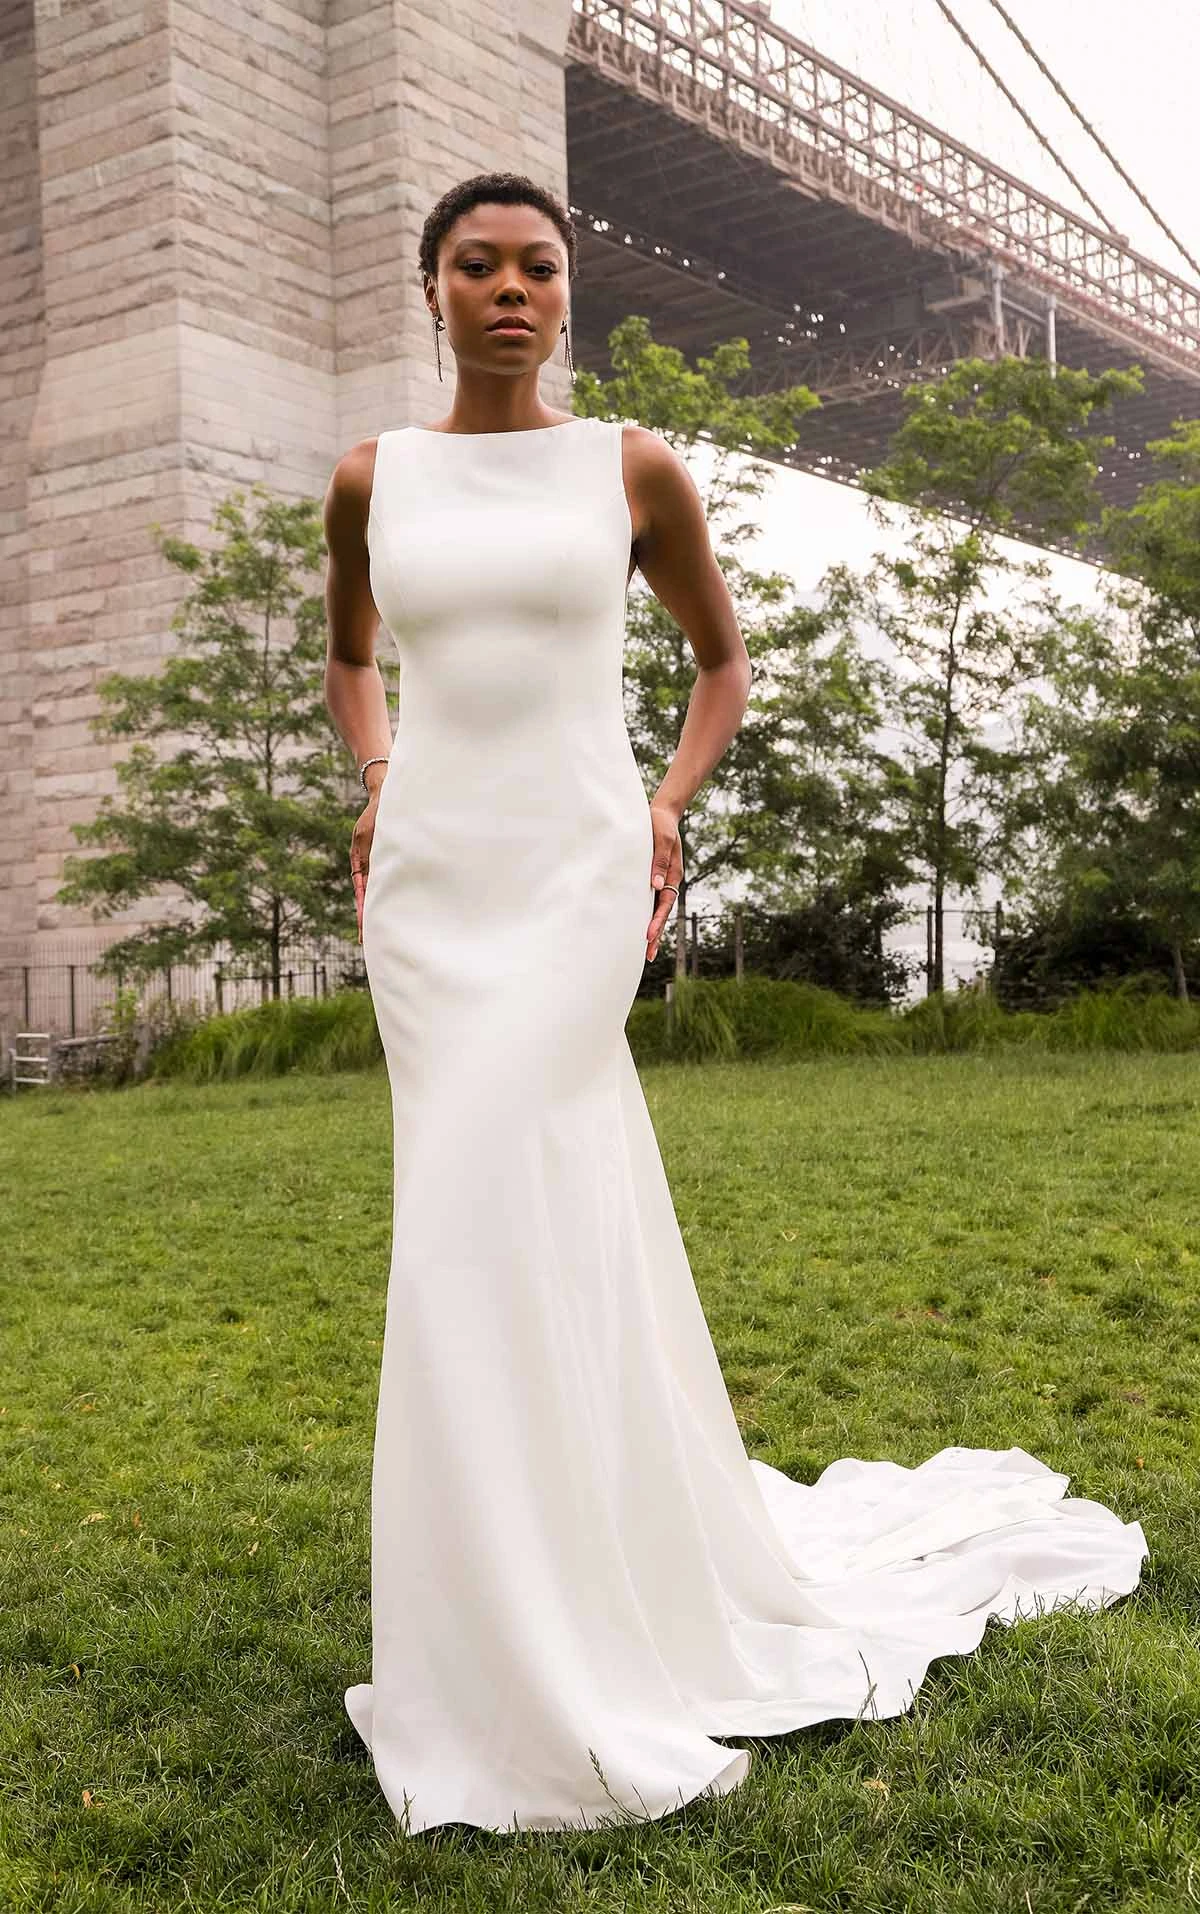 simple column wedding dress with high neck and bow back details - D3901 by Essense of Australia